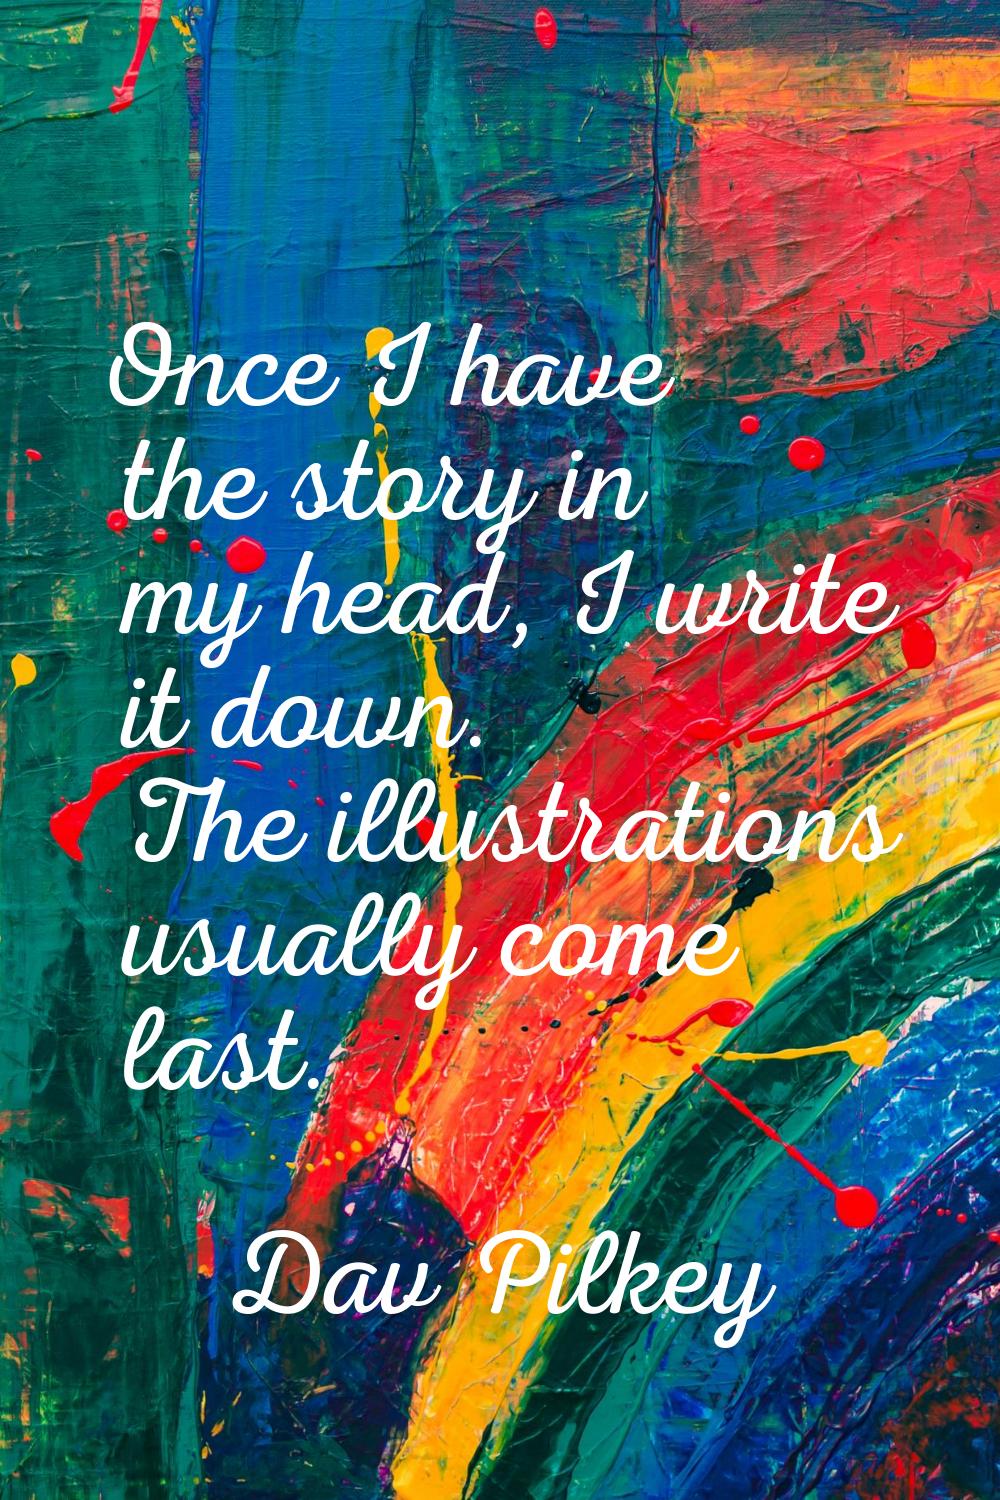 Once I have the story in my head, I write it down. The illustrations usually come last.